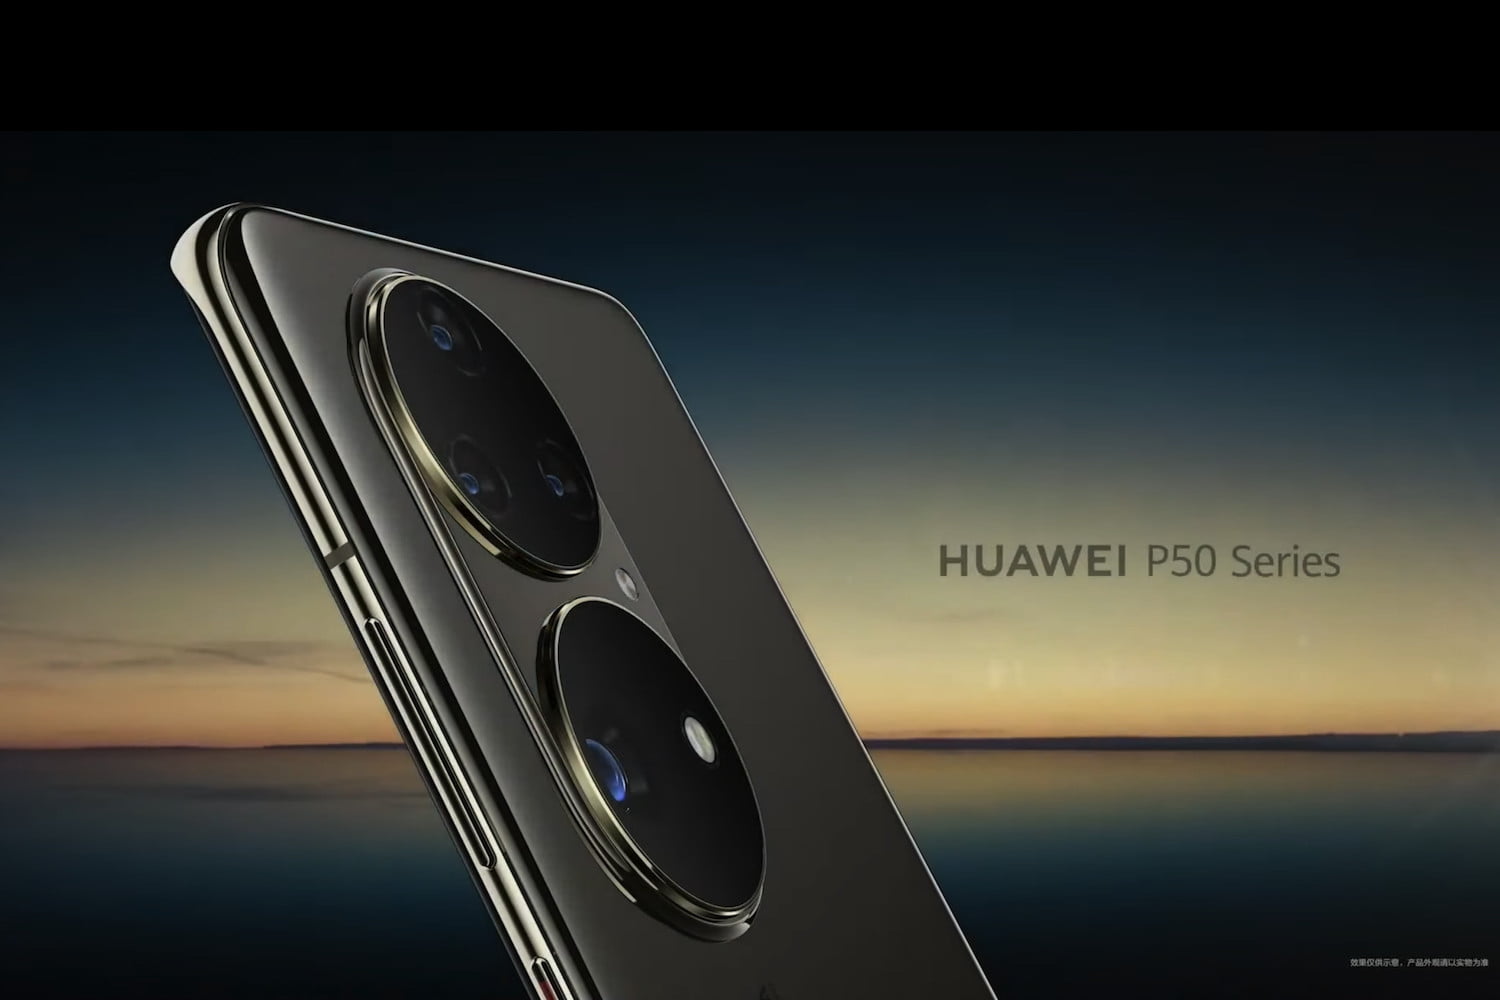 Huawei could launch the P50 series on July 29